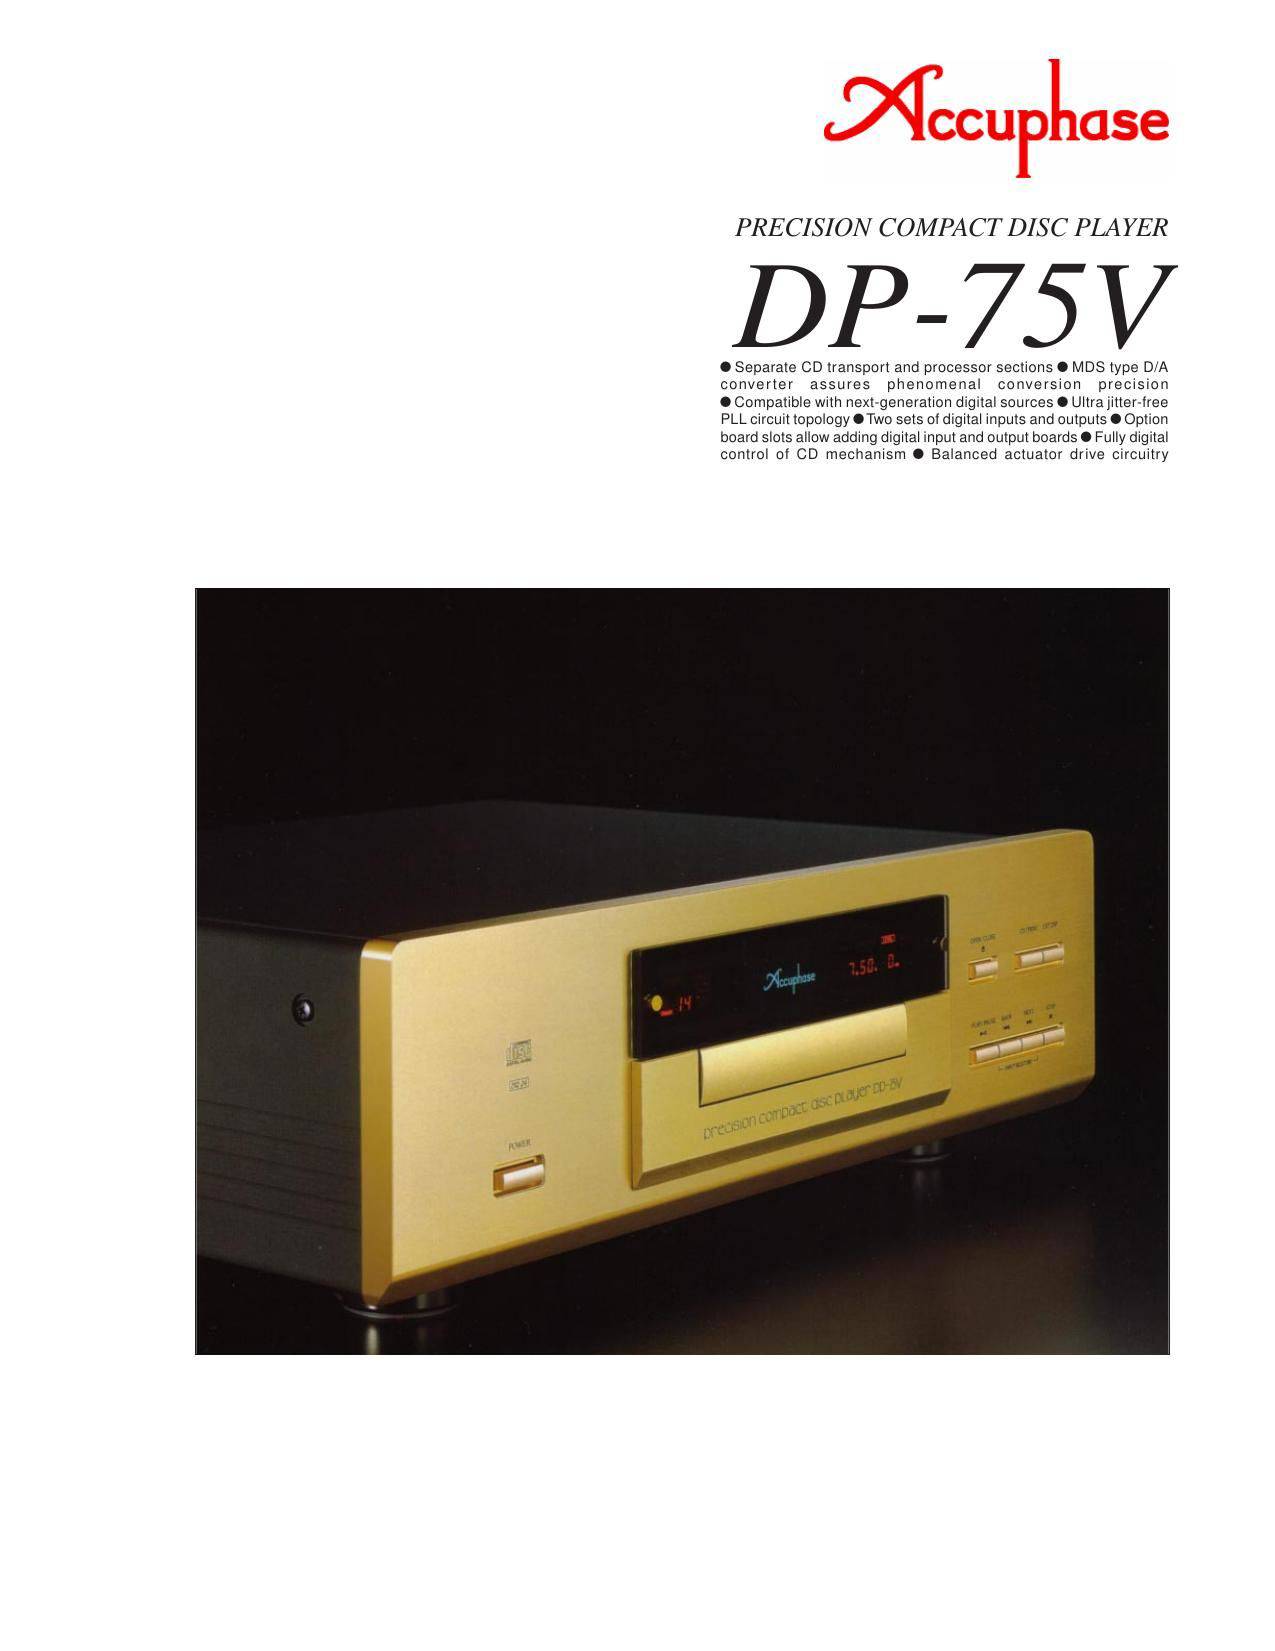 Accuphase DP-75